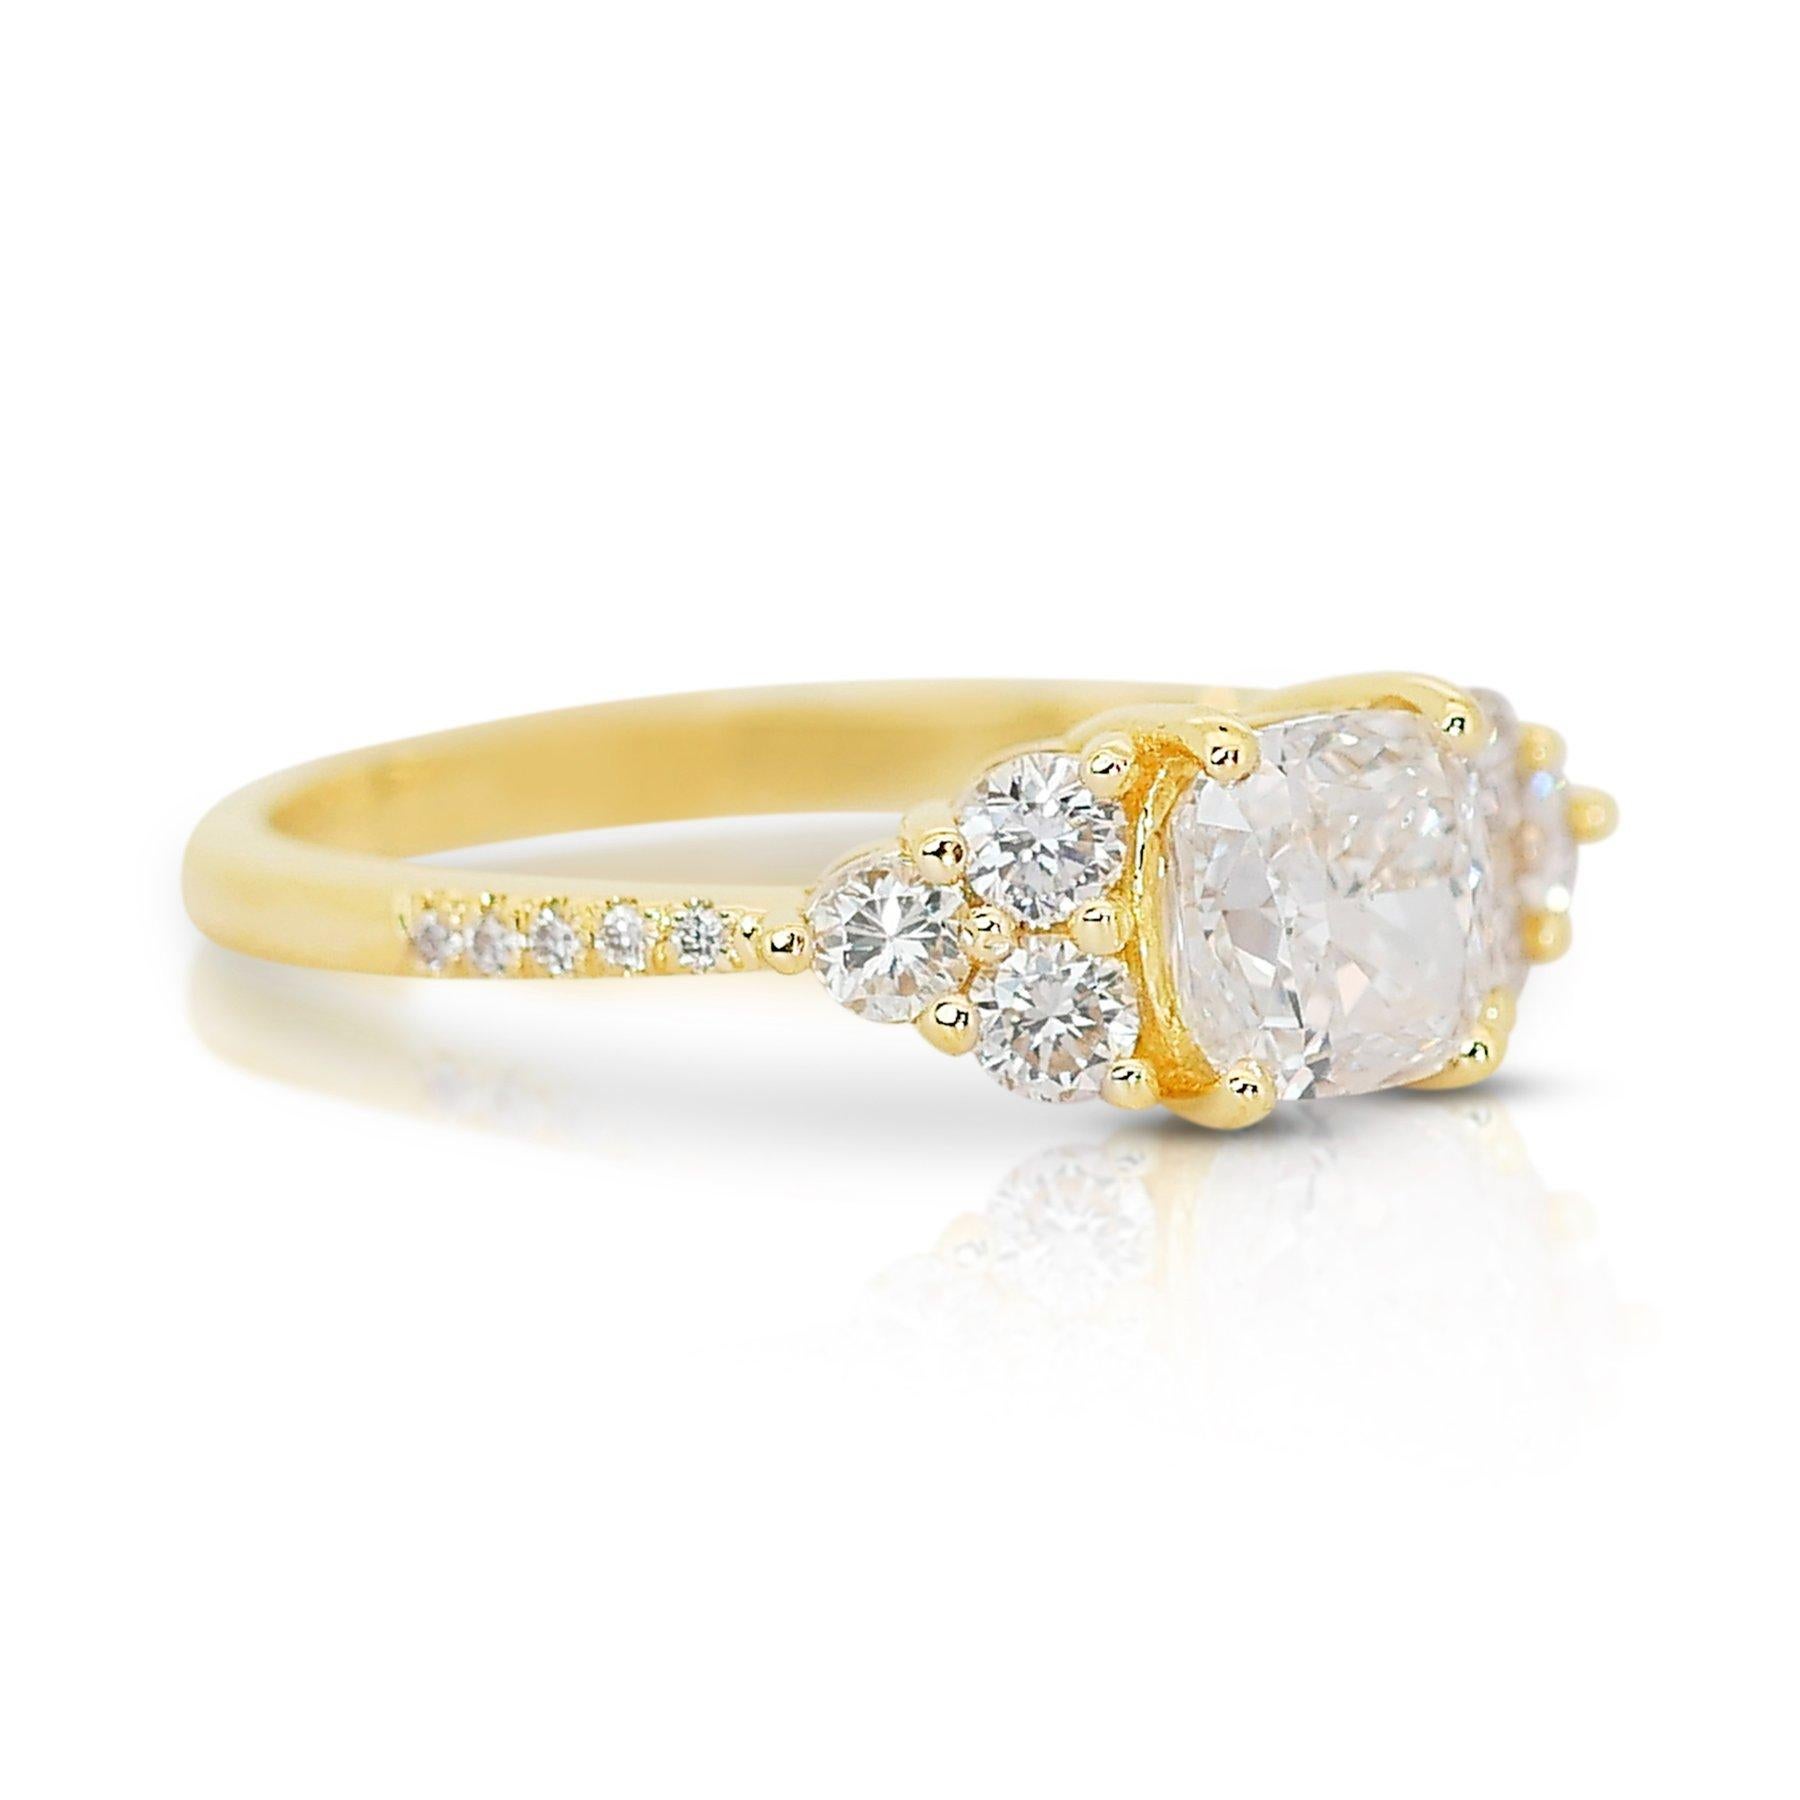 Cushion Cut Lustrous 1.32ct Diamond Pave Ring in 18k Yellow Gold - GIA Certified